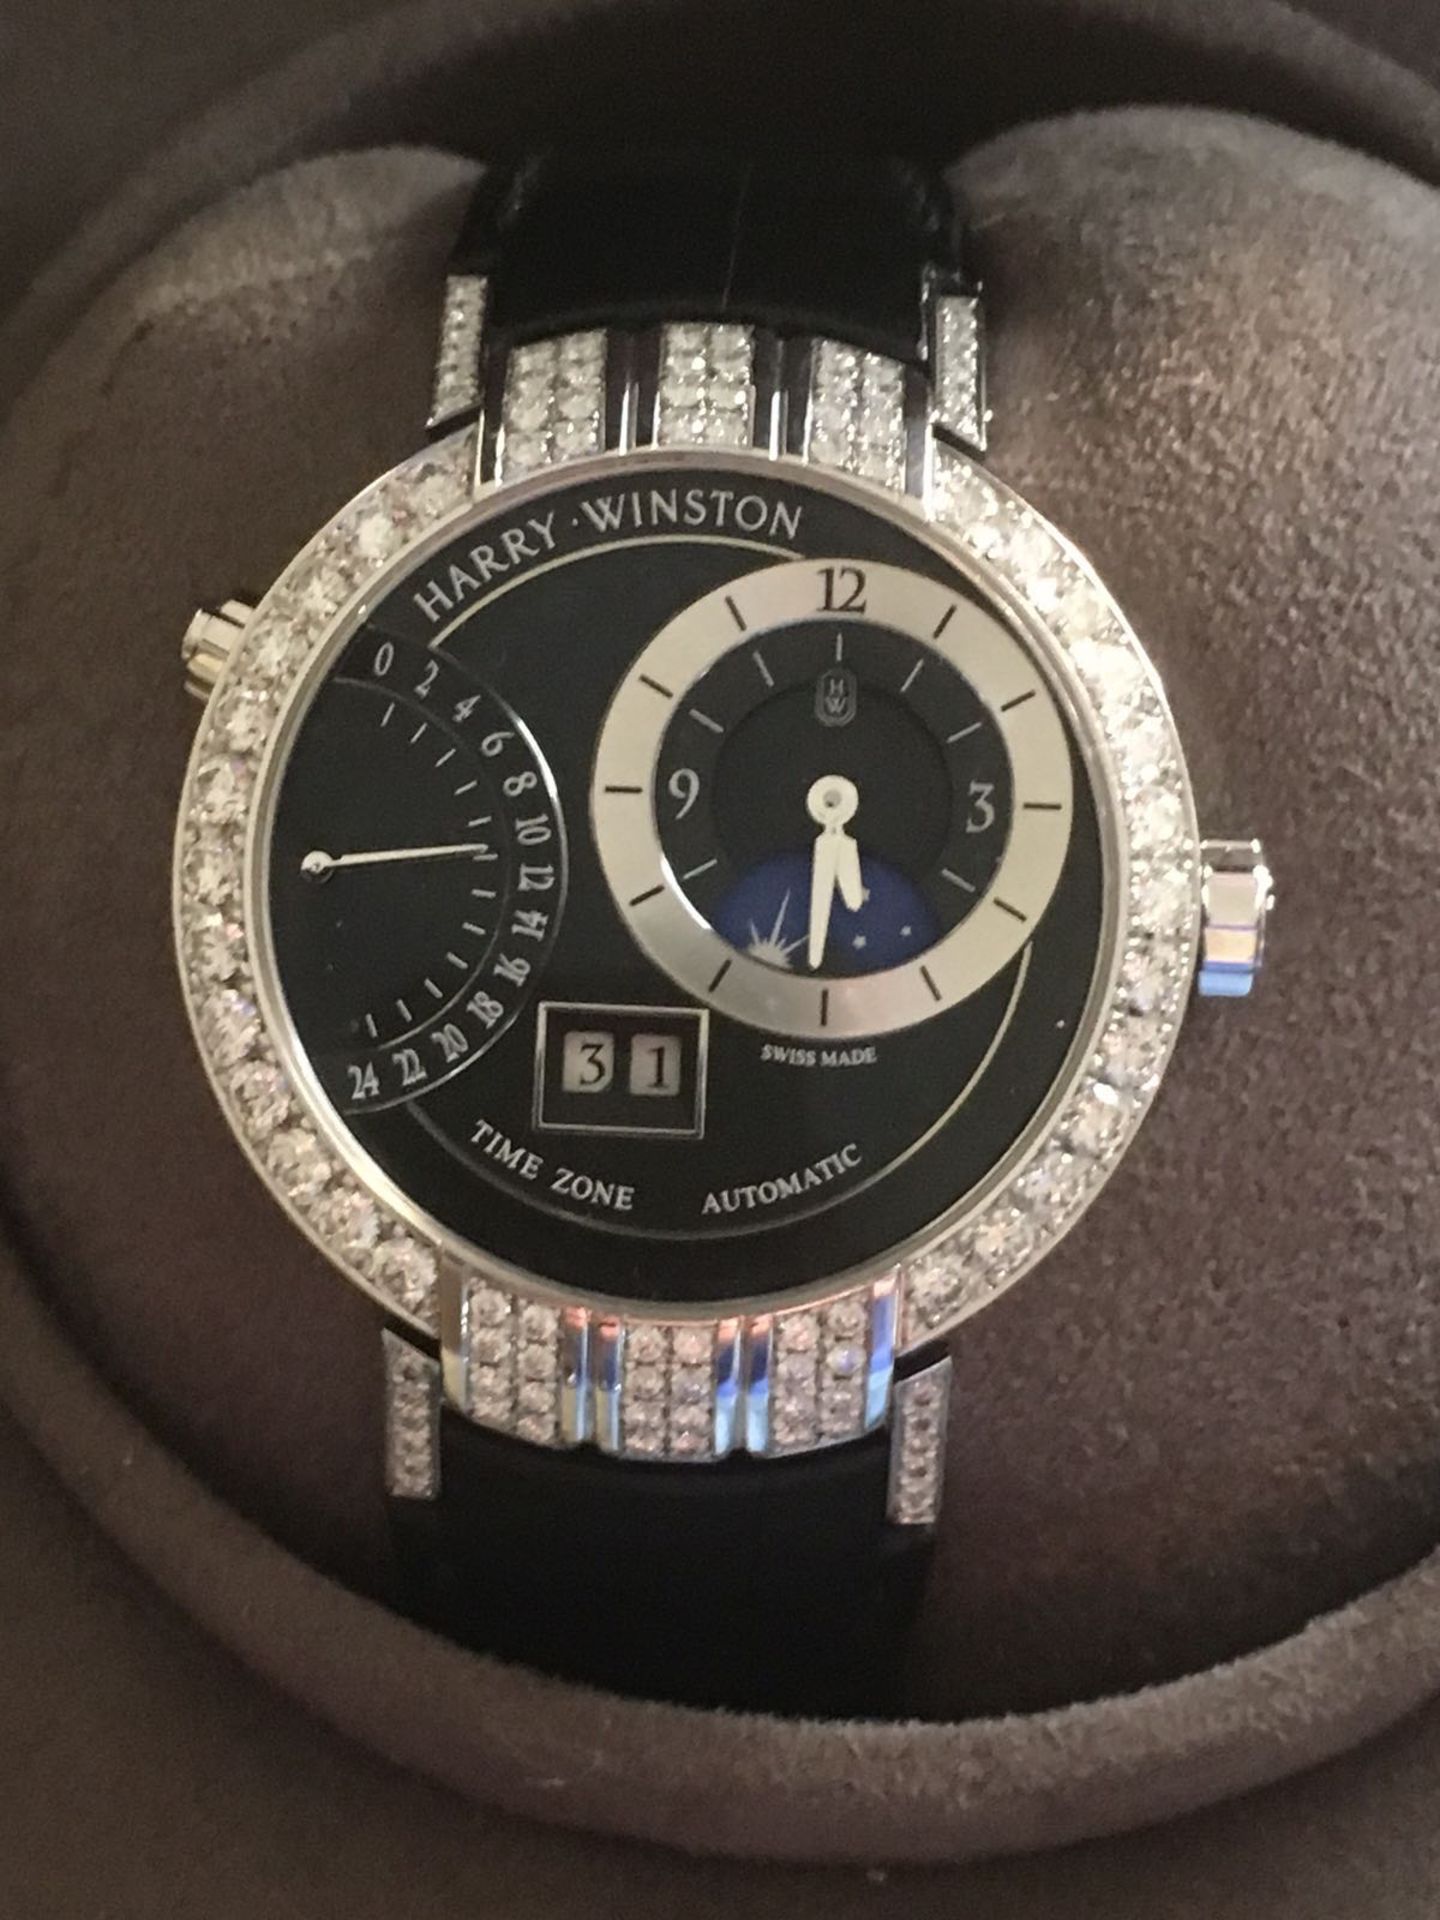 HARRY WINSTON Premier Excenter 18k White Gold Watch with box & papers - Image 7 of 9